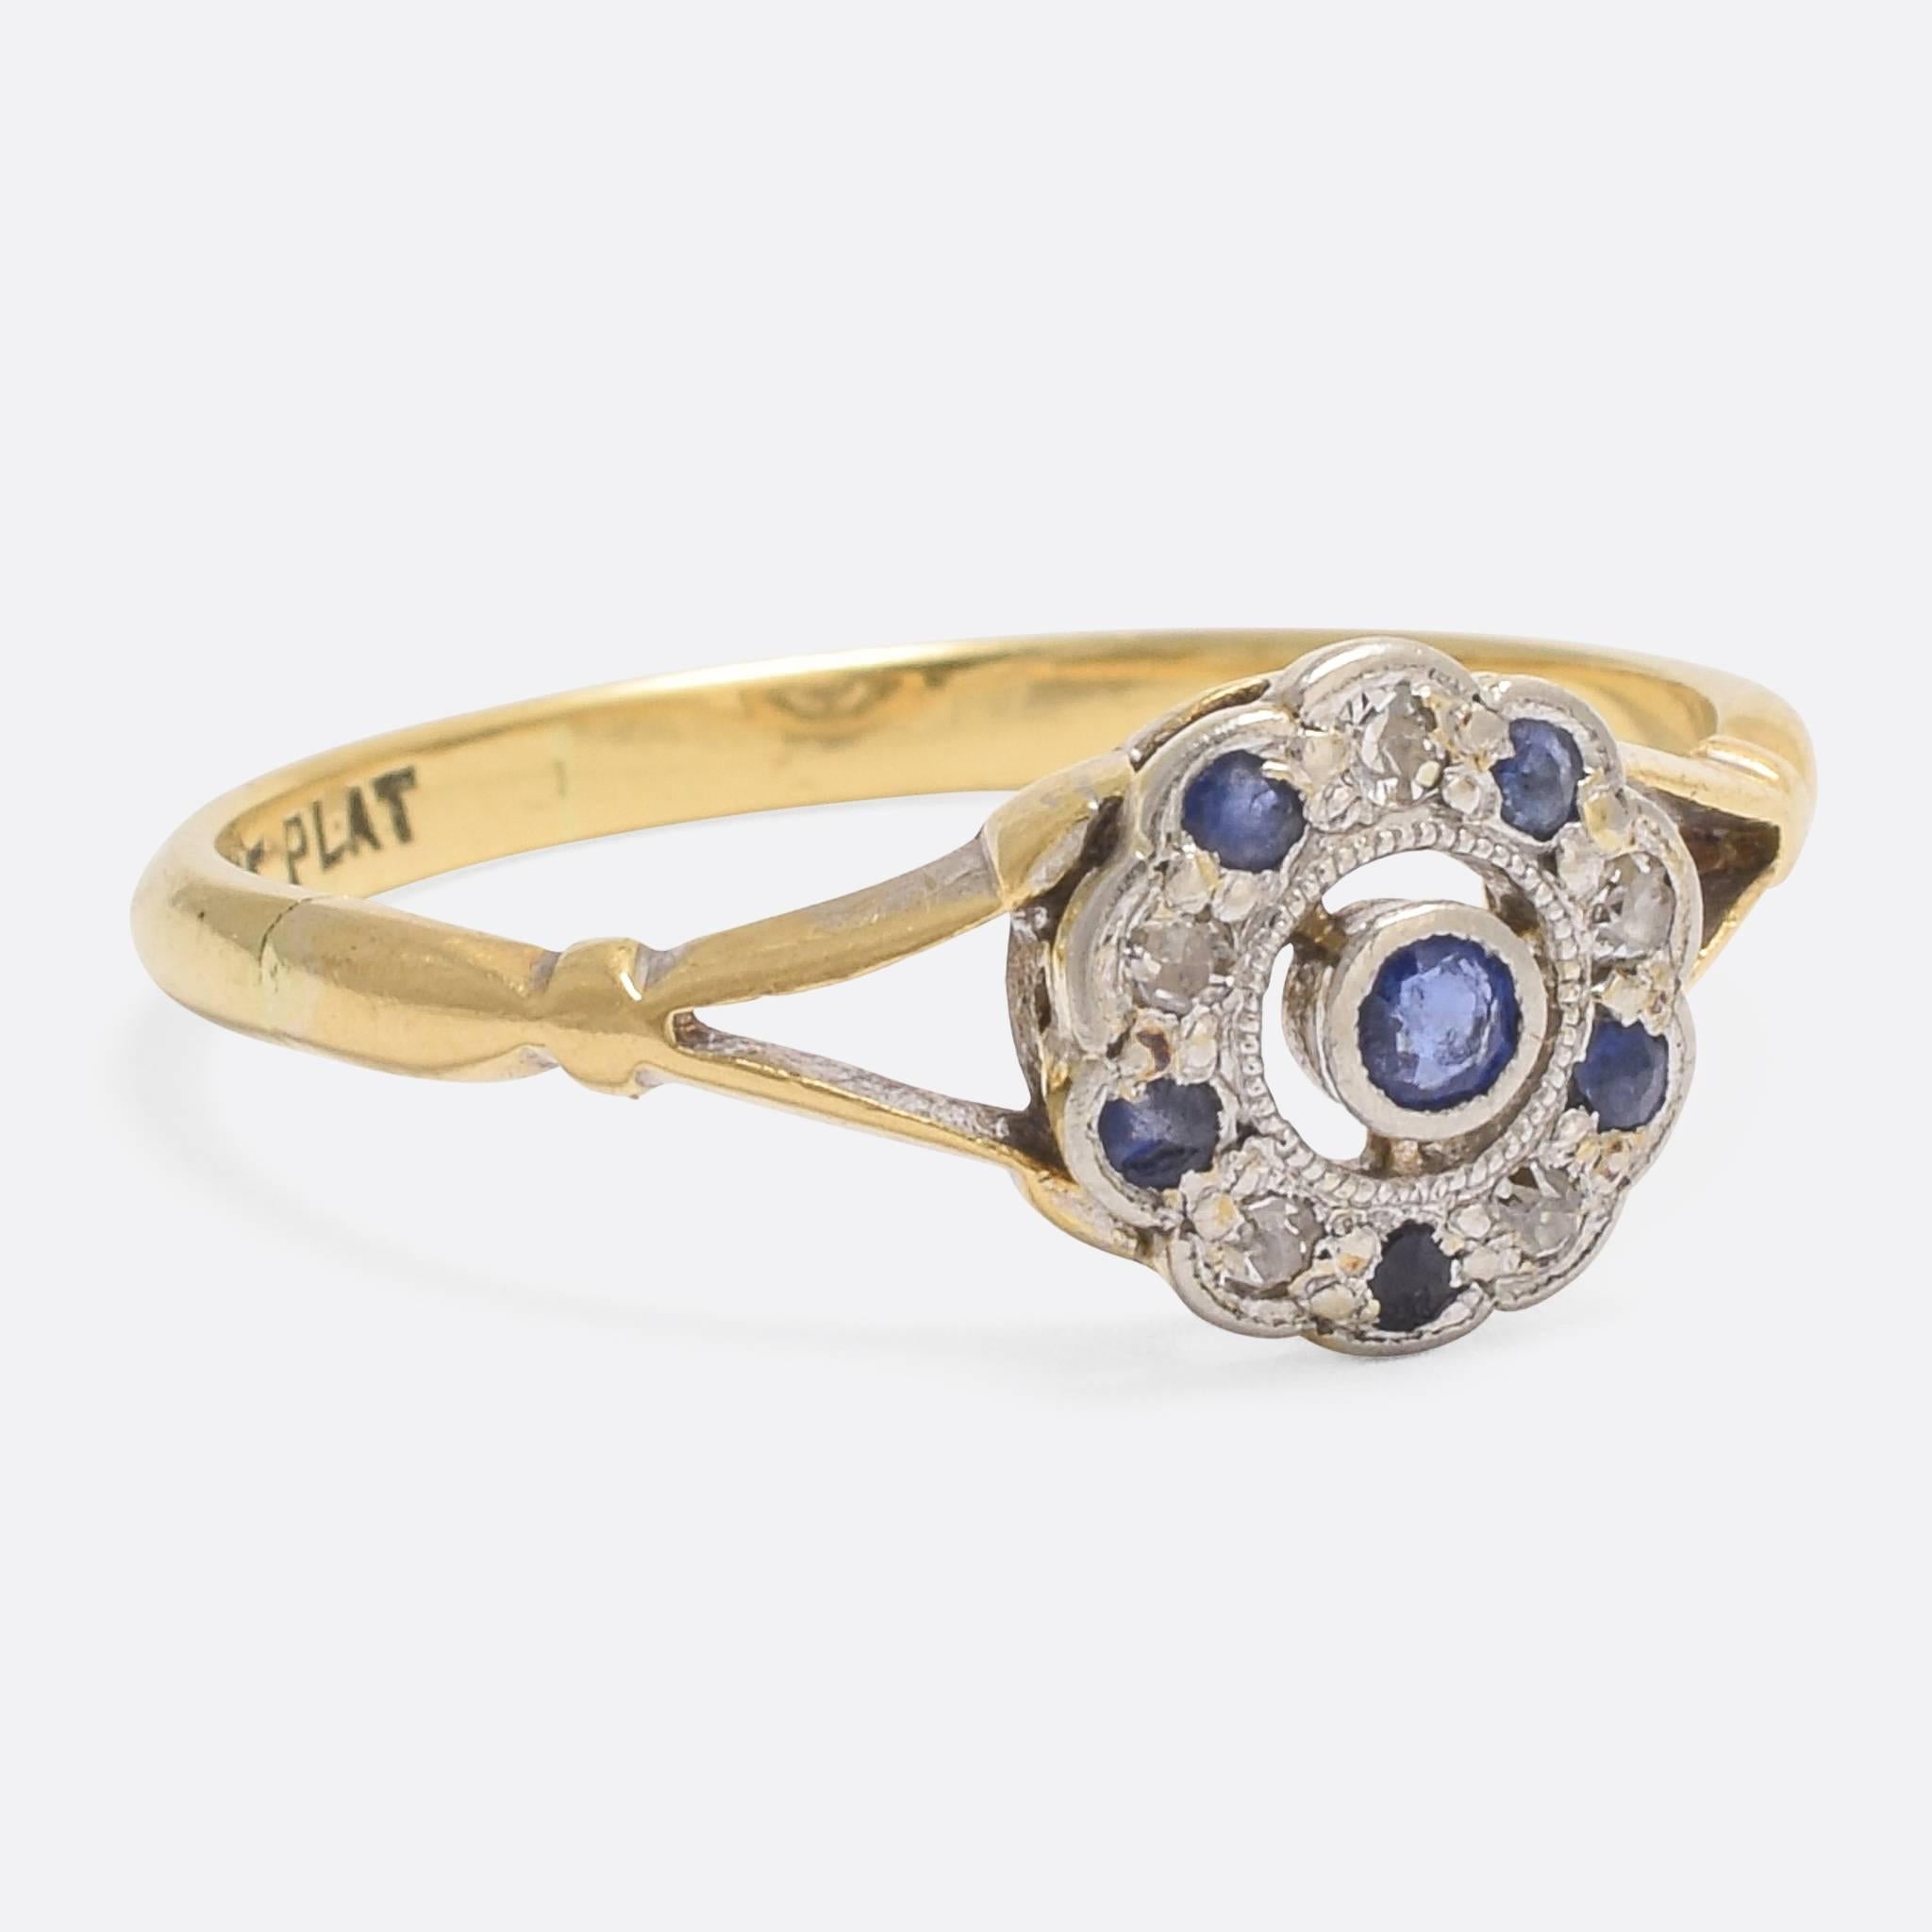 A cute Art Deco flower cluster ring, with a halo of blue sapphires and white diamonds set around a central sapphire. The head is finished in platinum, with millegrain detailing, and rests on an 18k yellow gold knife-edge band.

STONES
Blue Sapphires